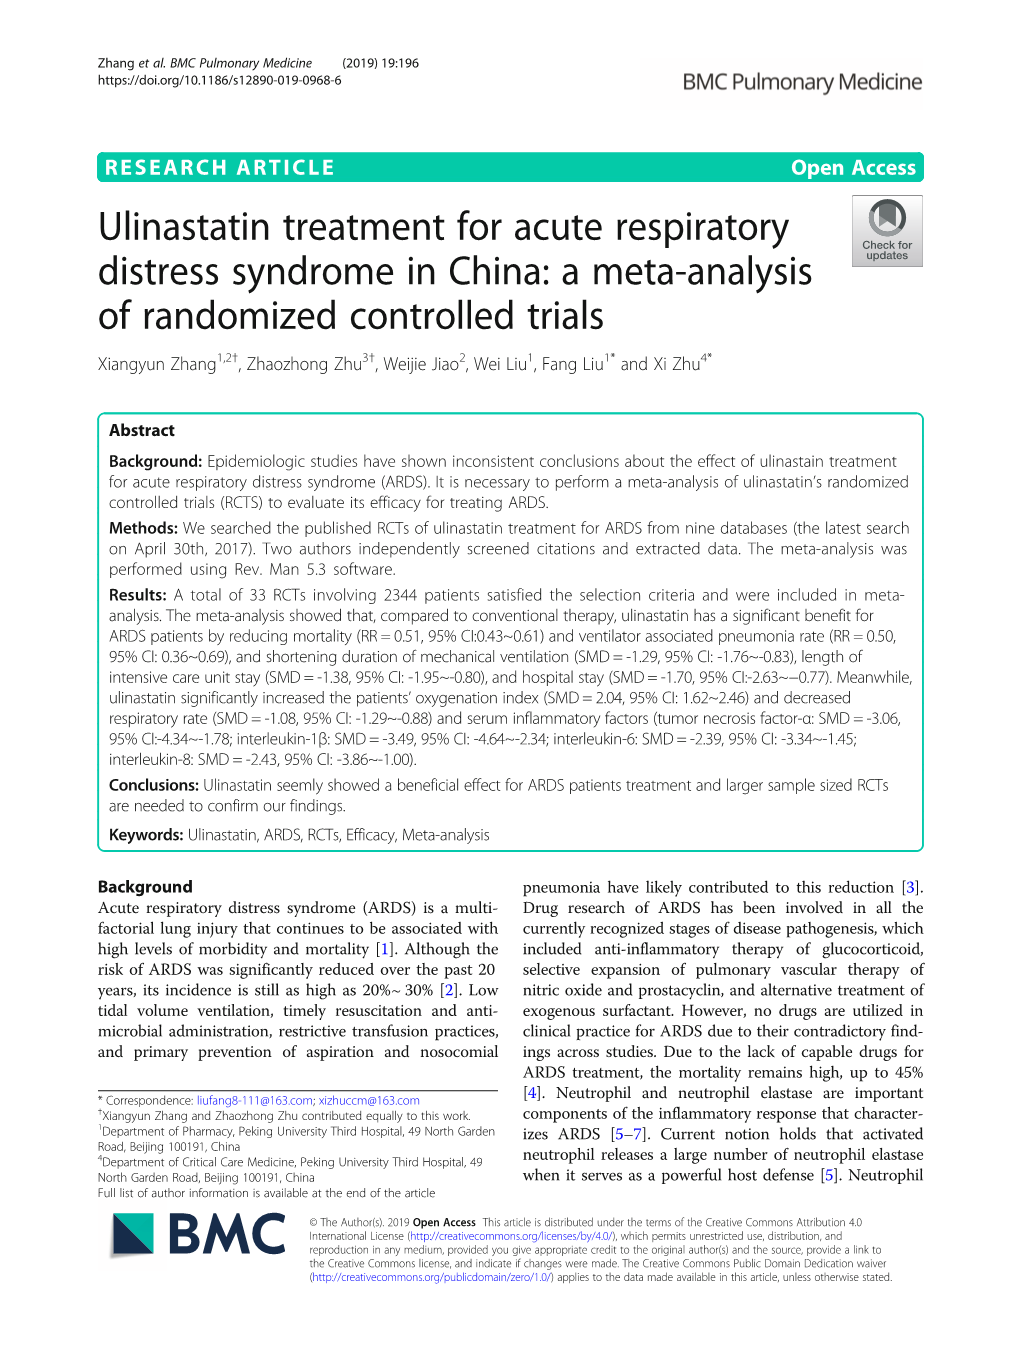 Ulinastatin Treatment for Acute Respiratory Distress Syndrome In